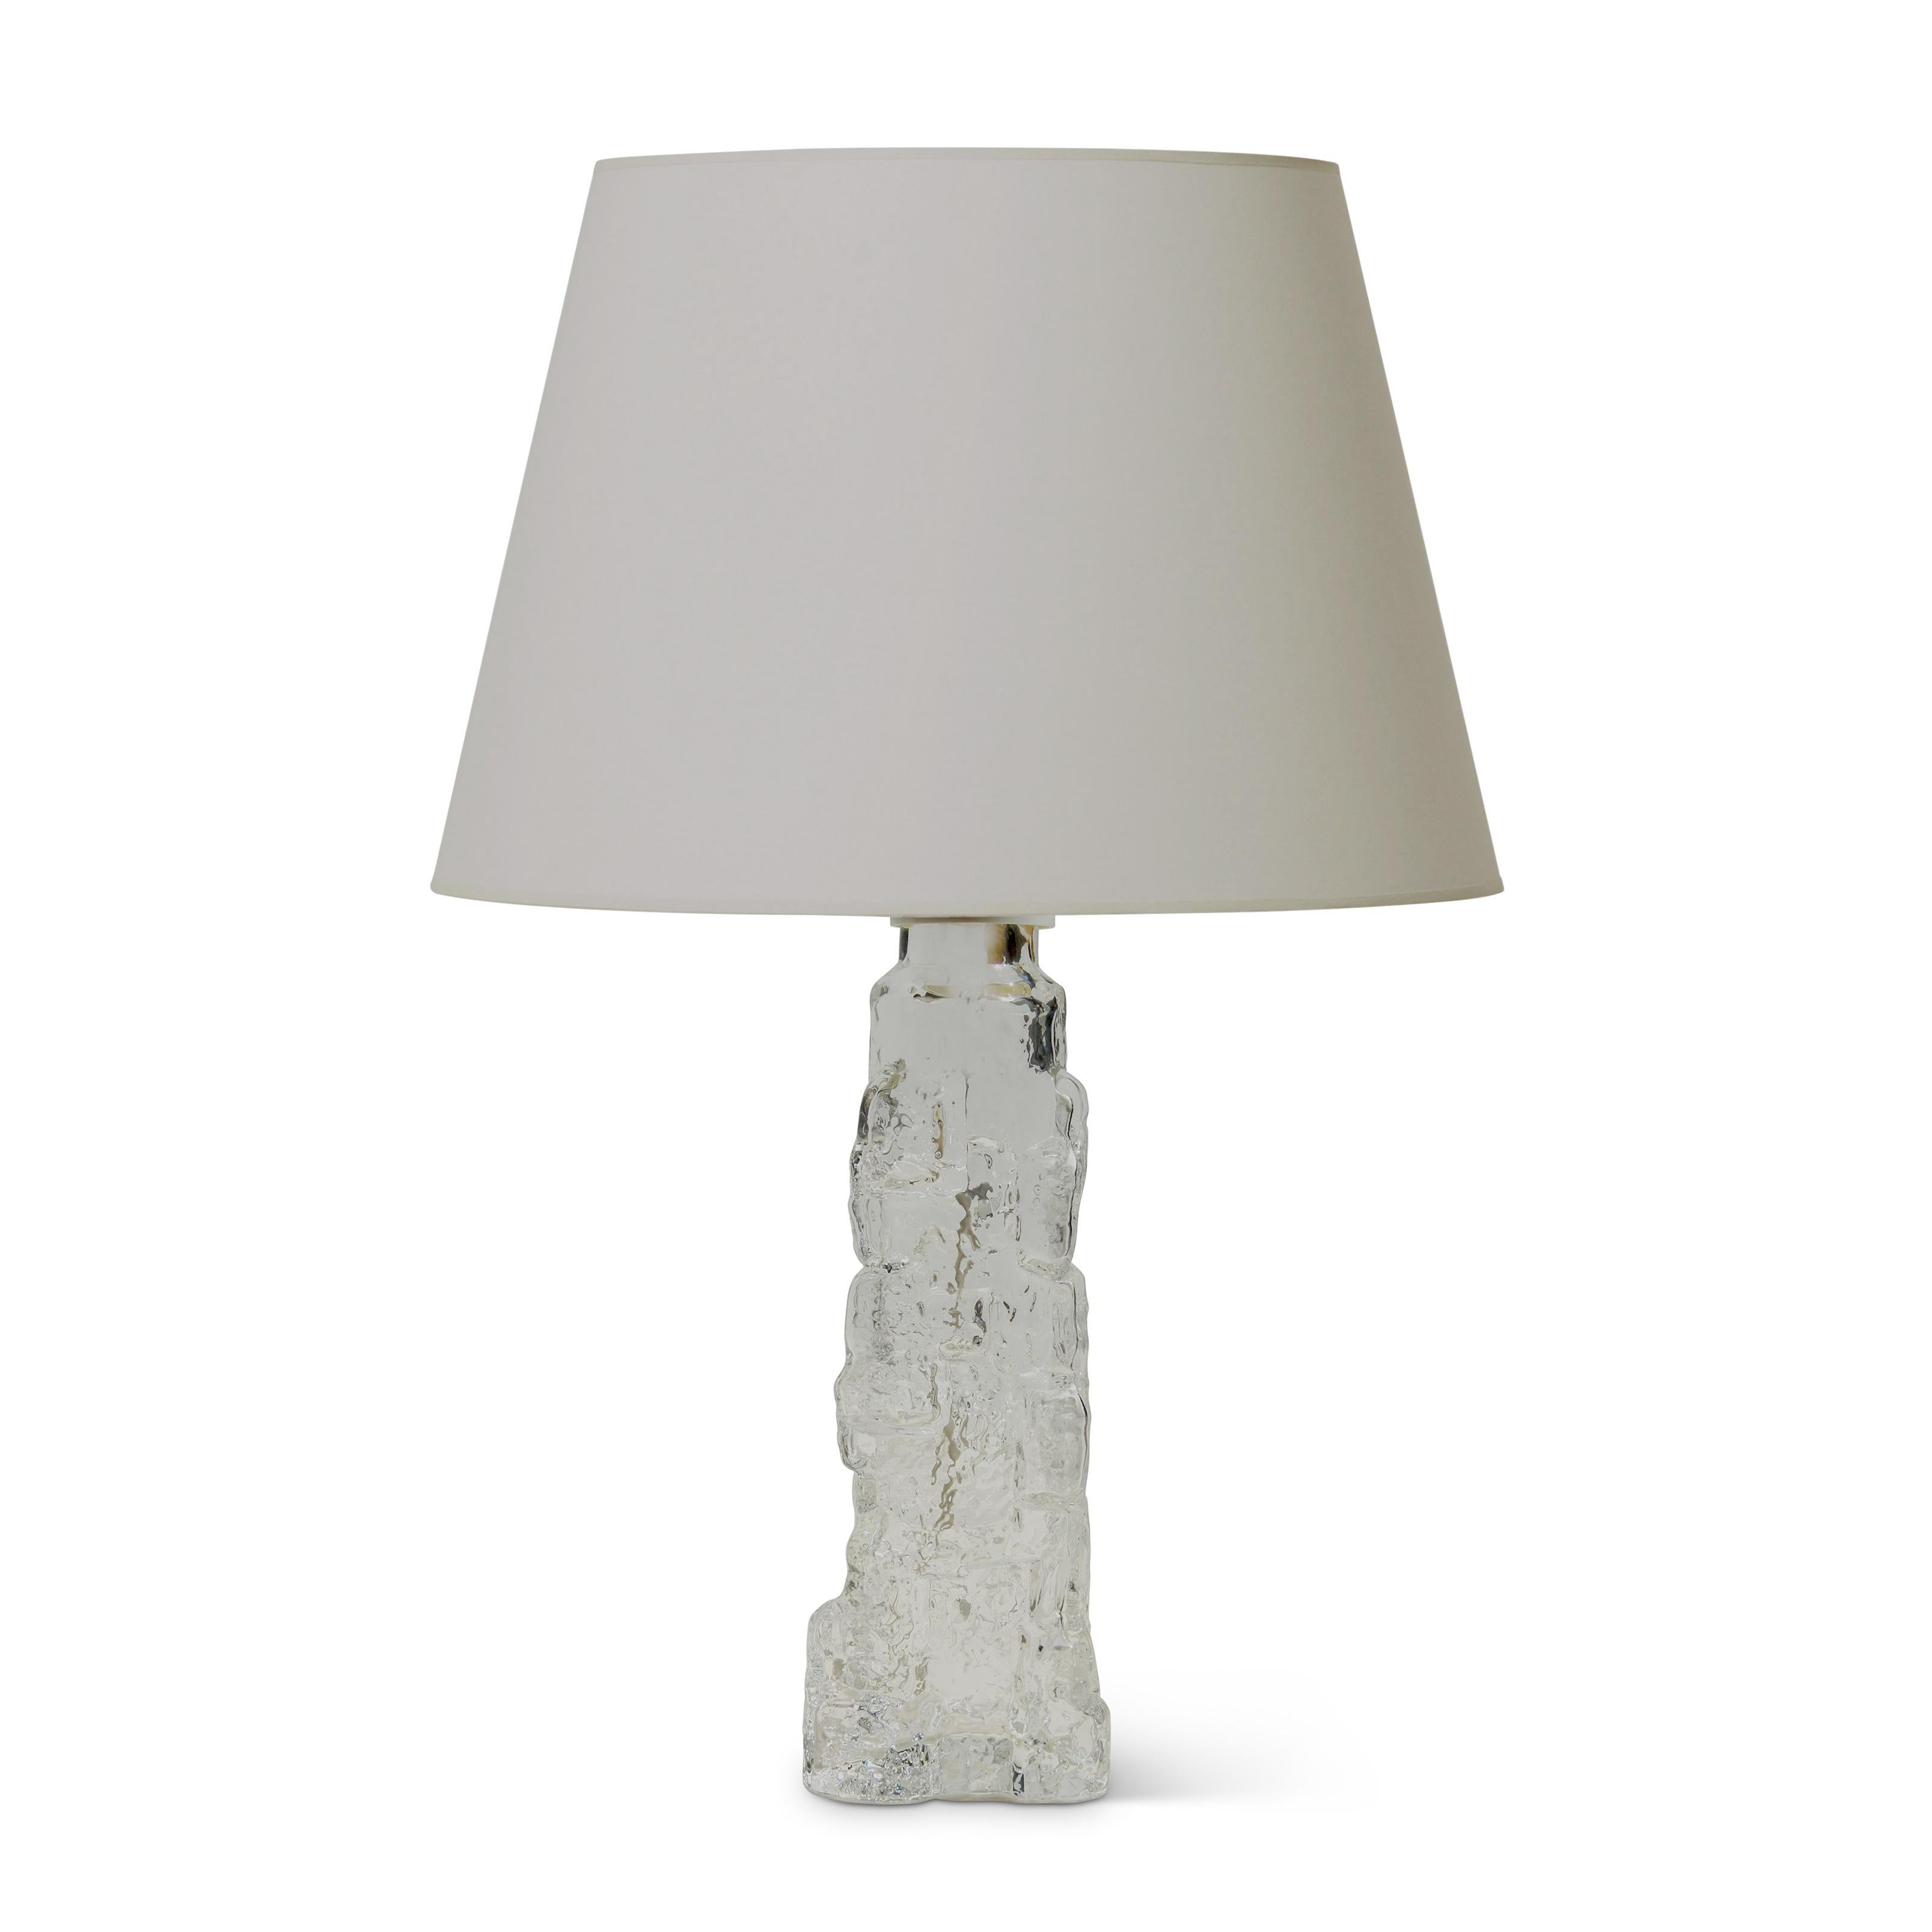 Table lamps (pair and single available) evoking rocky outcroppings by Reijmyre Glasbruk, having a tall upwardly tapered triangular base modeled with rocks and crags that catch light and create a marvellous shimmer across the surface when lit,